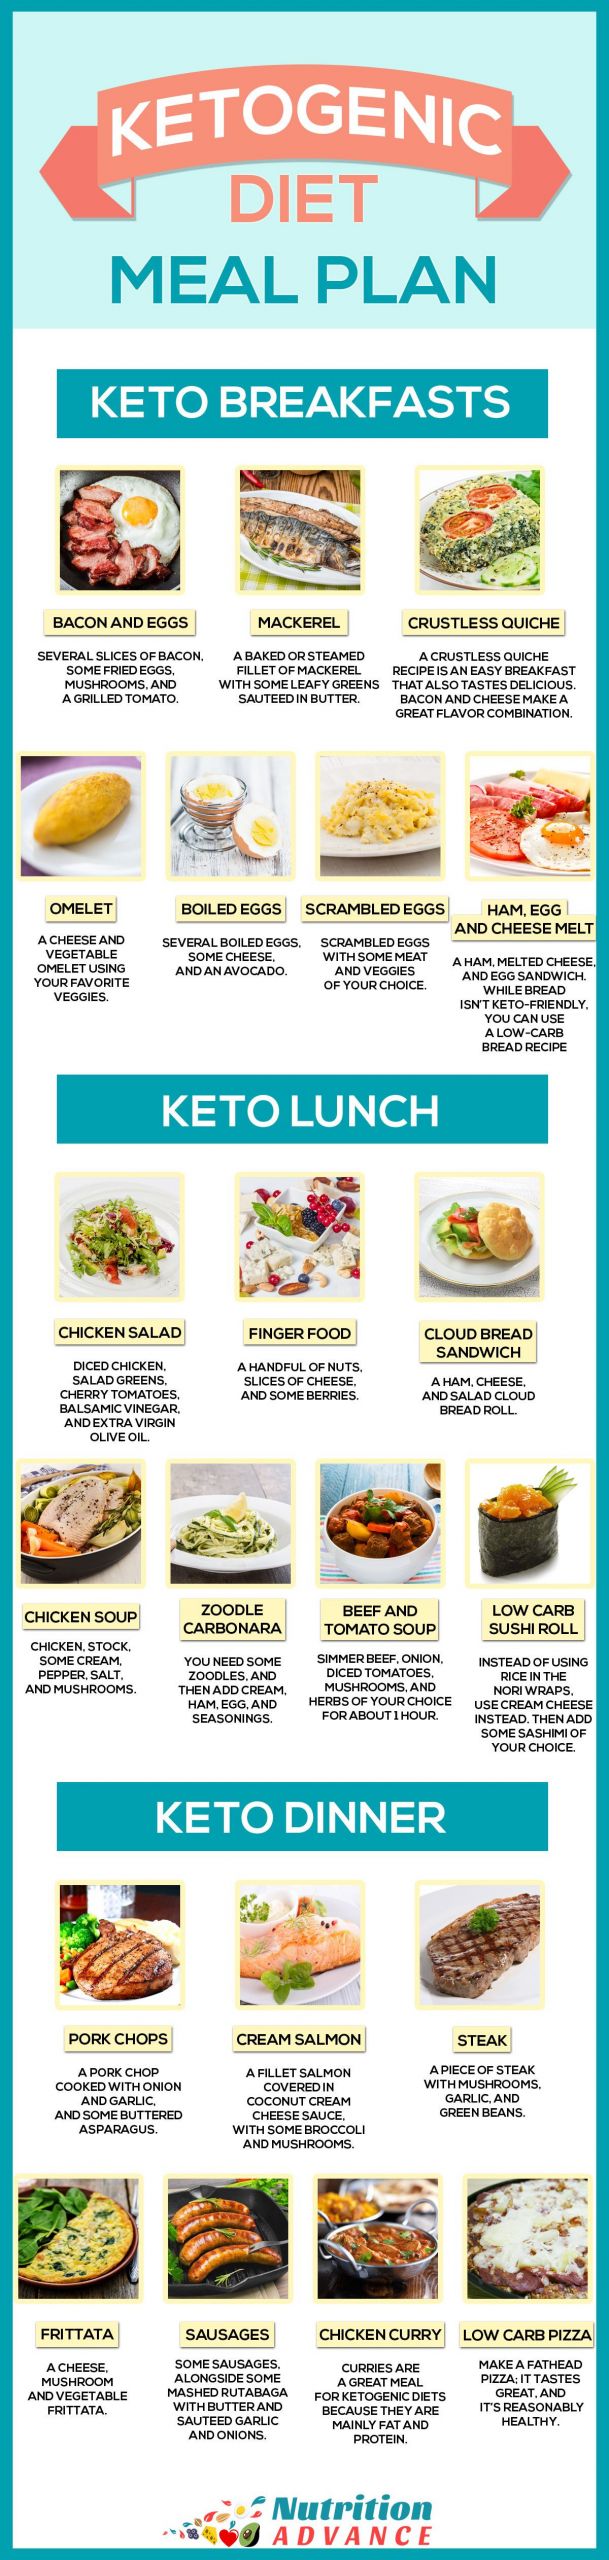 Keto Diet For Beginners Meal Plan Breakfast
 The Ketogenic Diet An Ultimate Guide to Keto